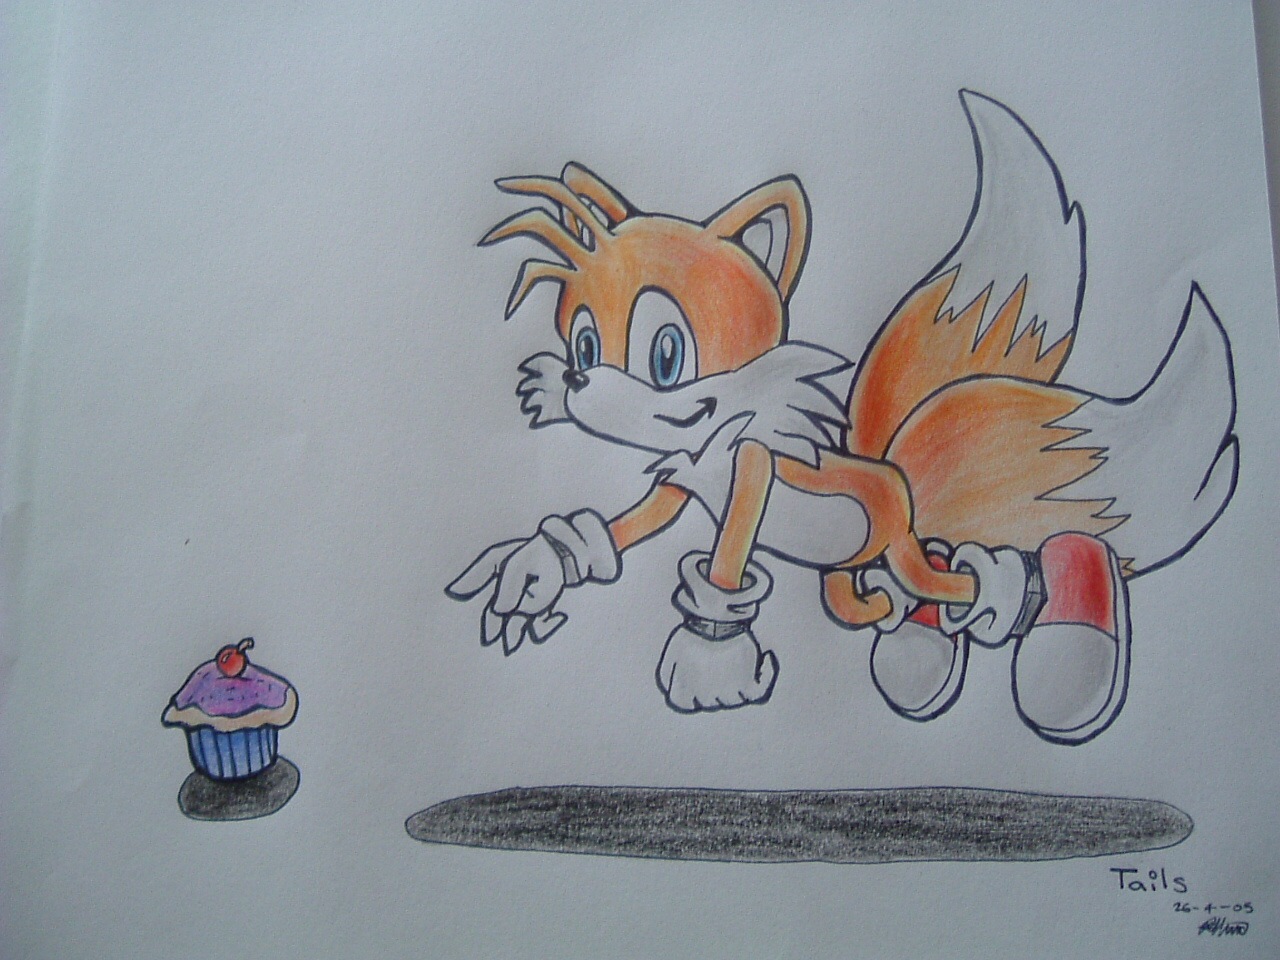 Tails and the cupcake by bek-ee